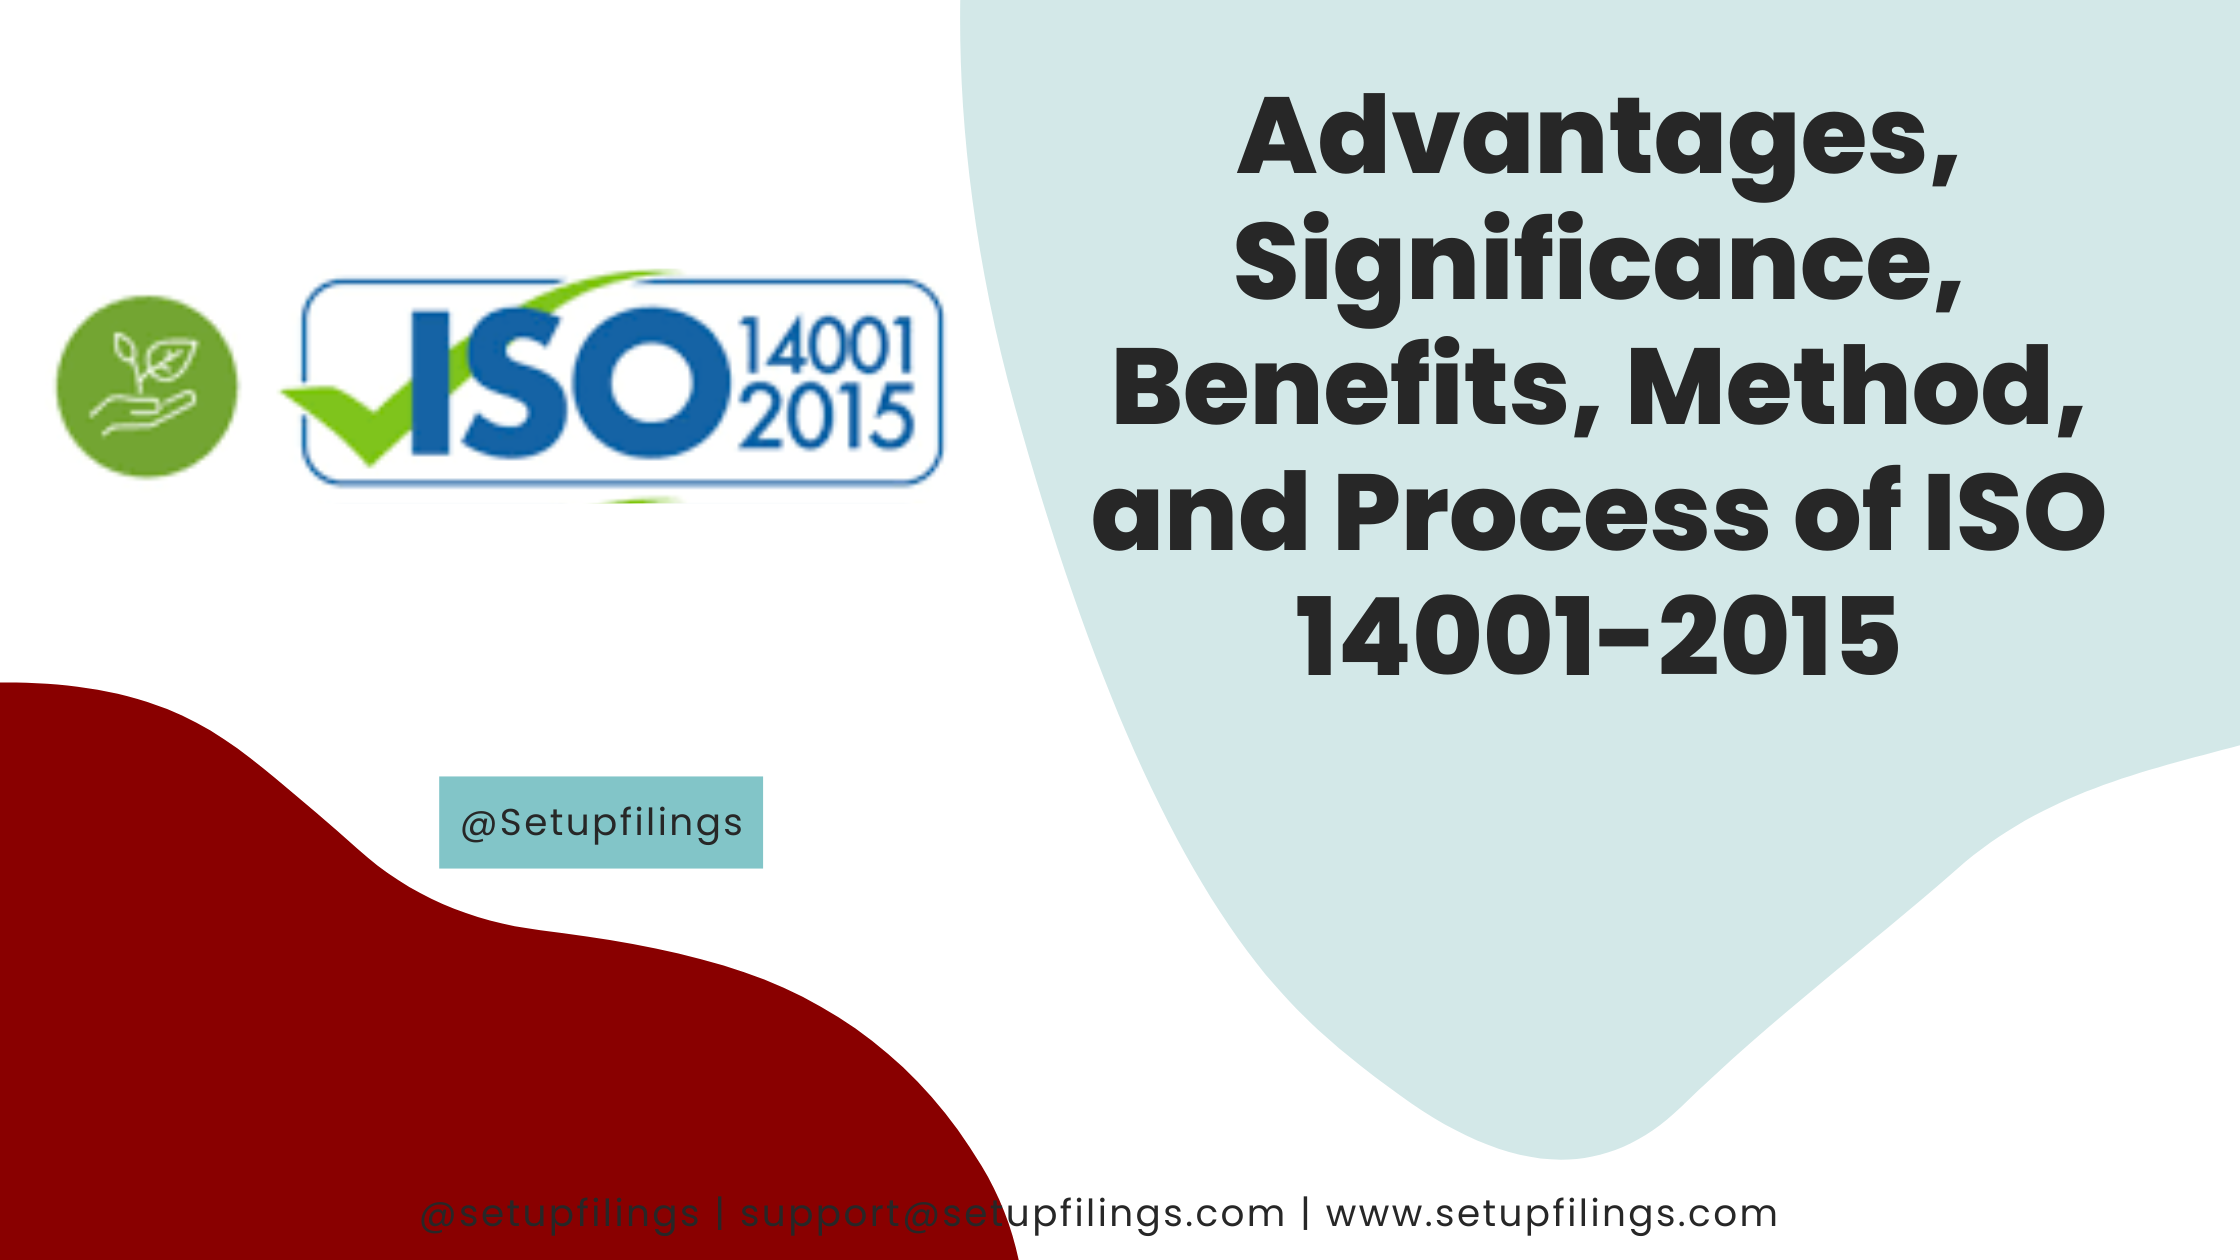 Advantages-Significance-Benefits-Method-and-Process-of-ISO-14001-2015